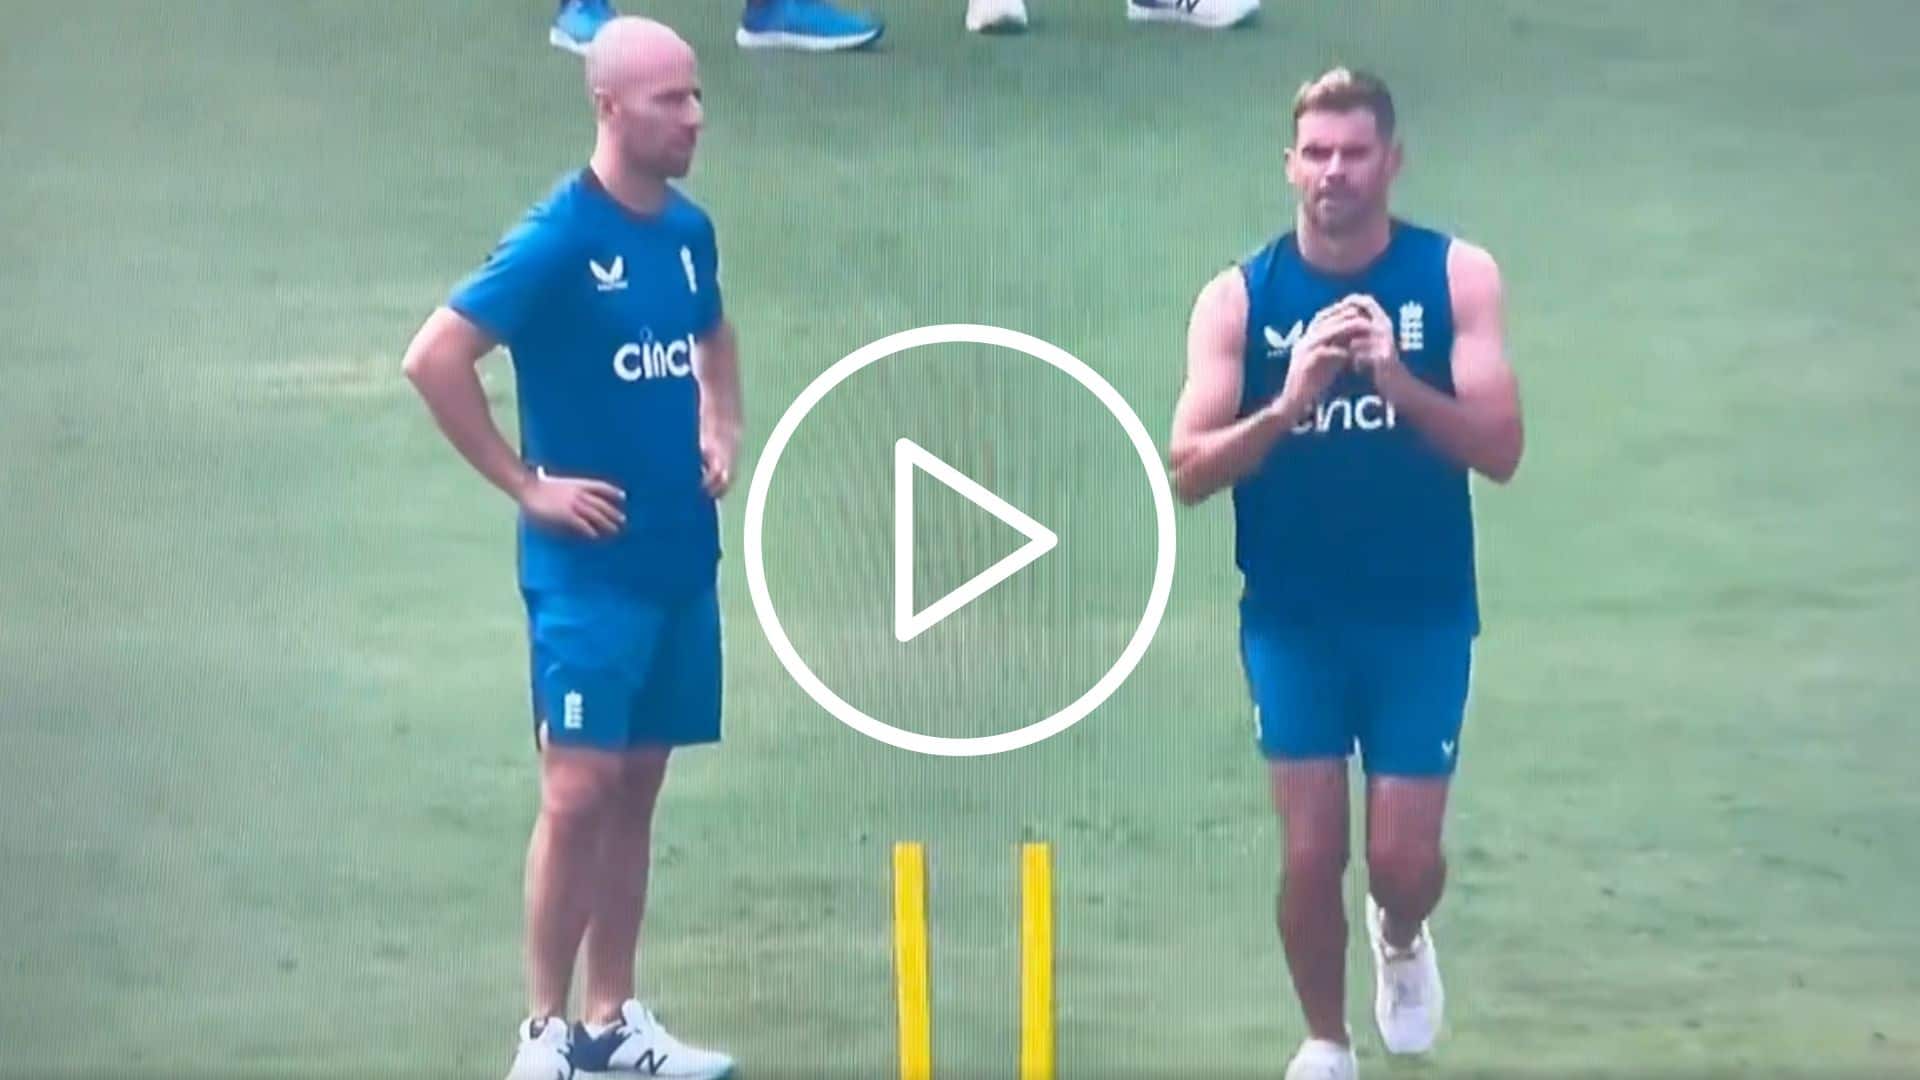 [Watch] James Anderson Bowls Left-Arm Spin In Nets, Impresses Ravi Shastri